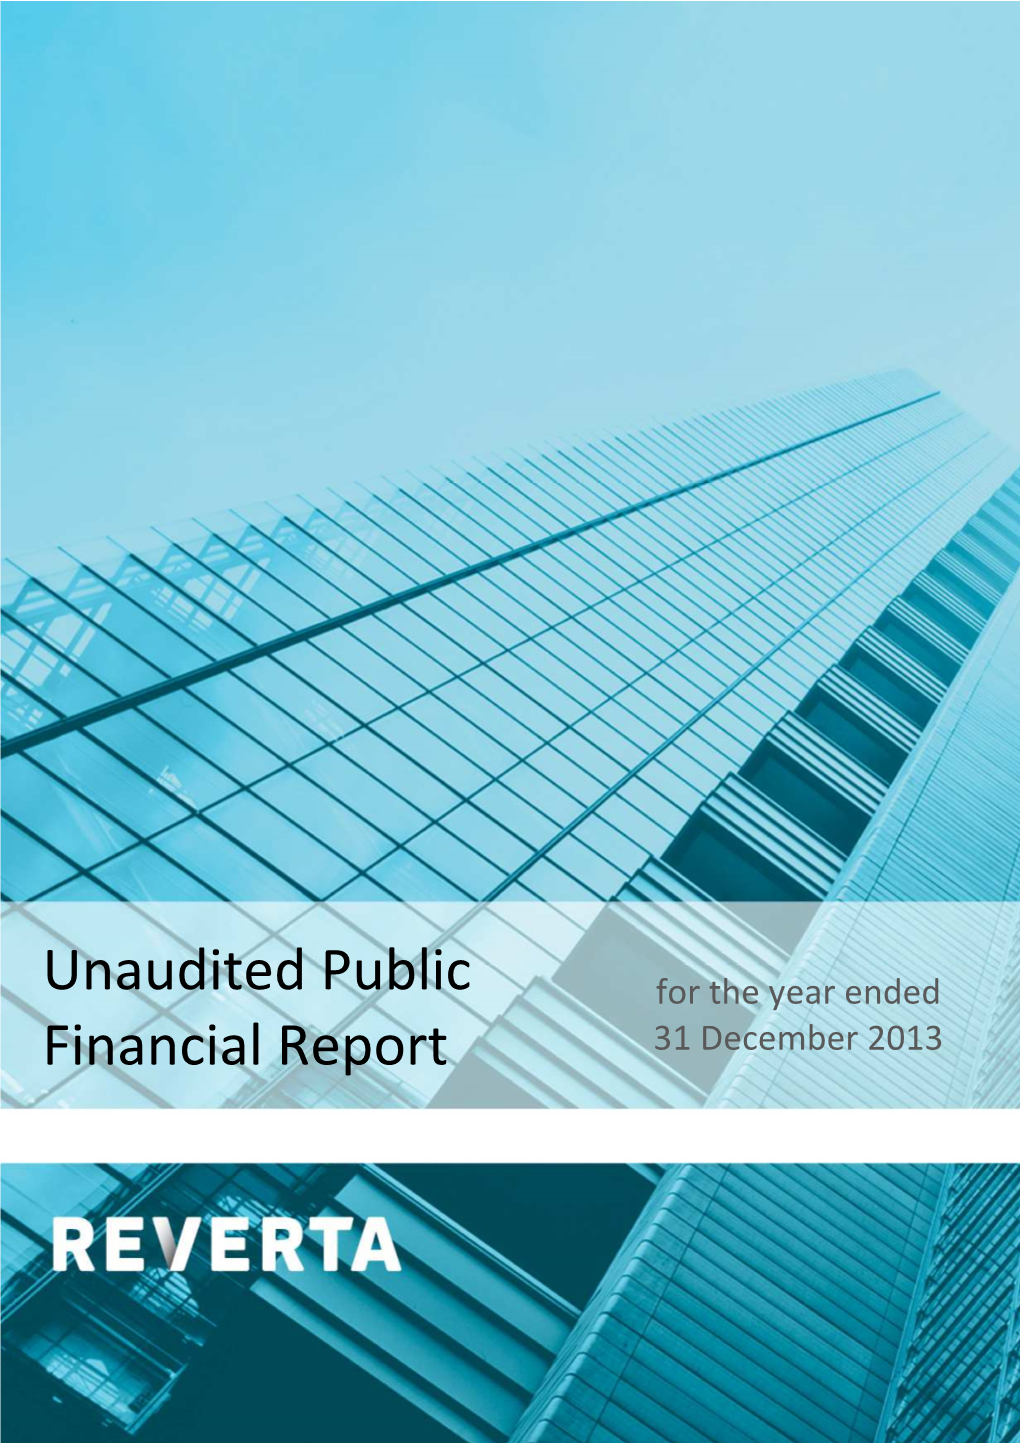 Unaudited Public Financial Report for the Year Ended 31 December 2013